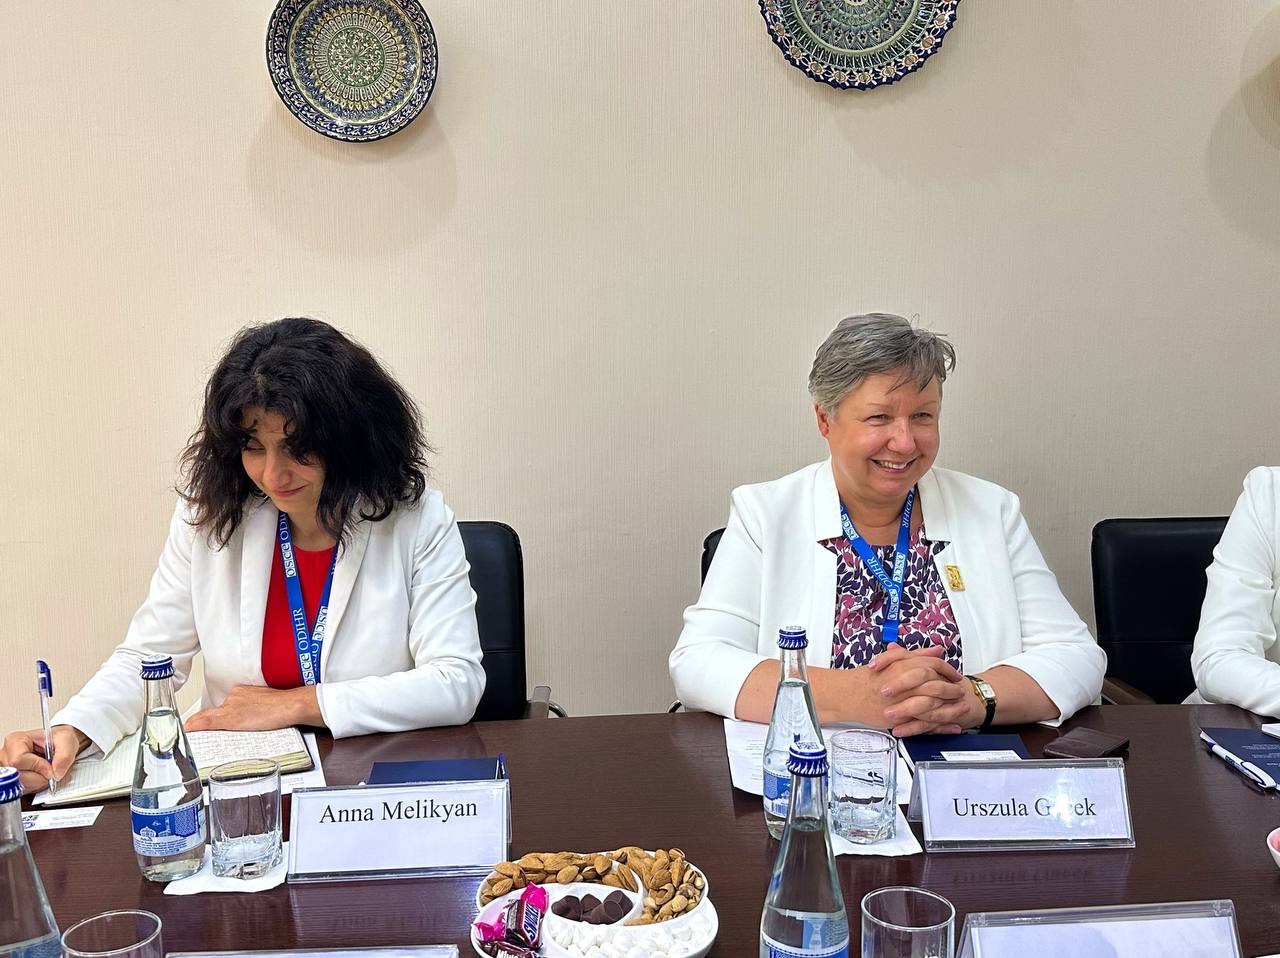 On the meeting of the Ombudsman with the head of the ODIHR/OSCE mission Urszula Gacek